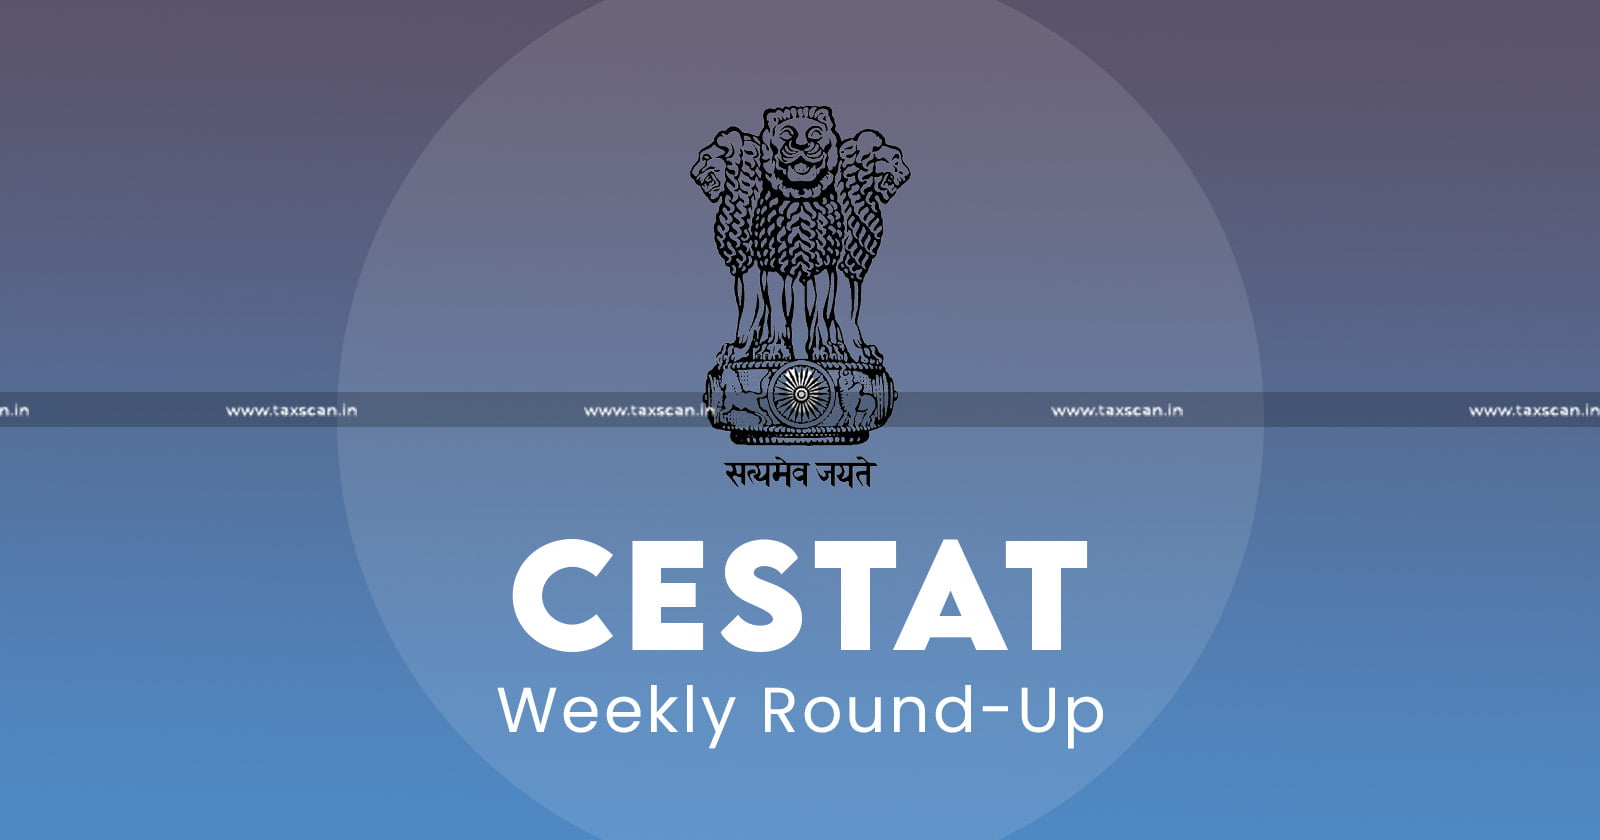 CESTAT Weekly Round-Up - Weekly Round-Up - CESTAT - customs - excise - service tax - taxscan